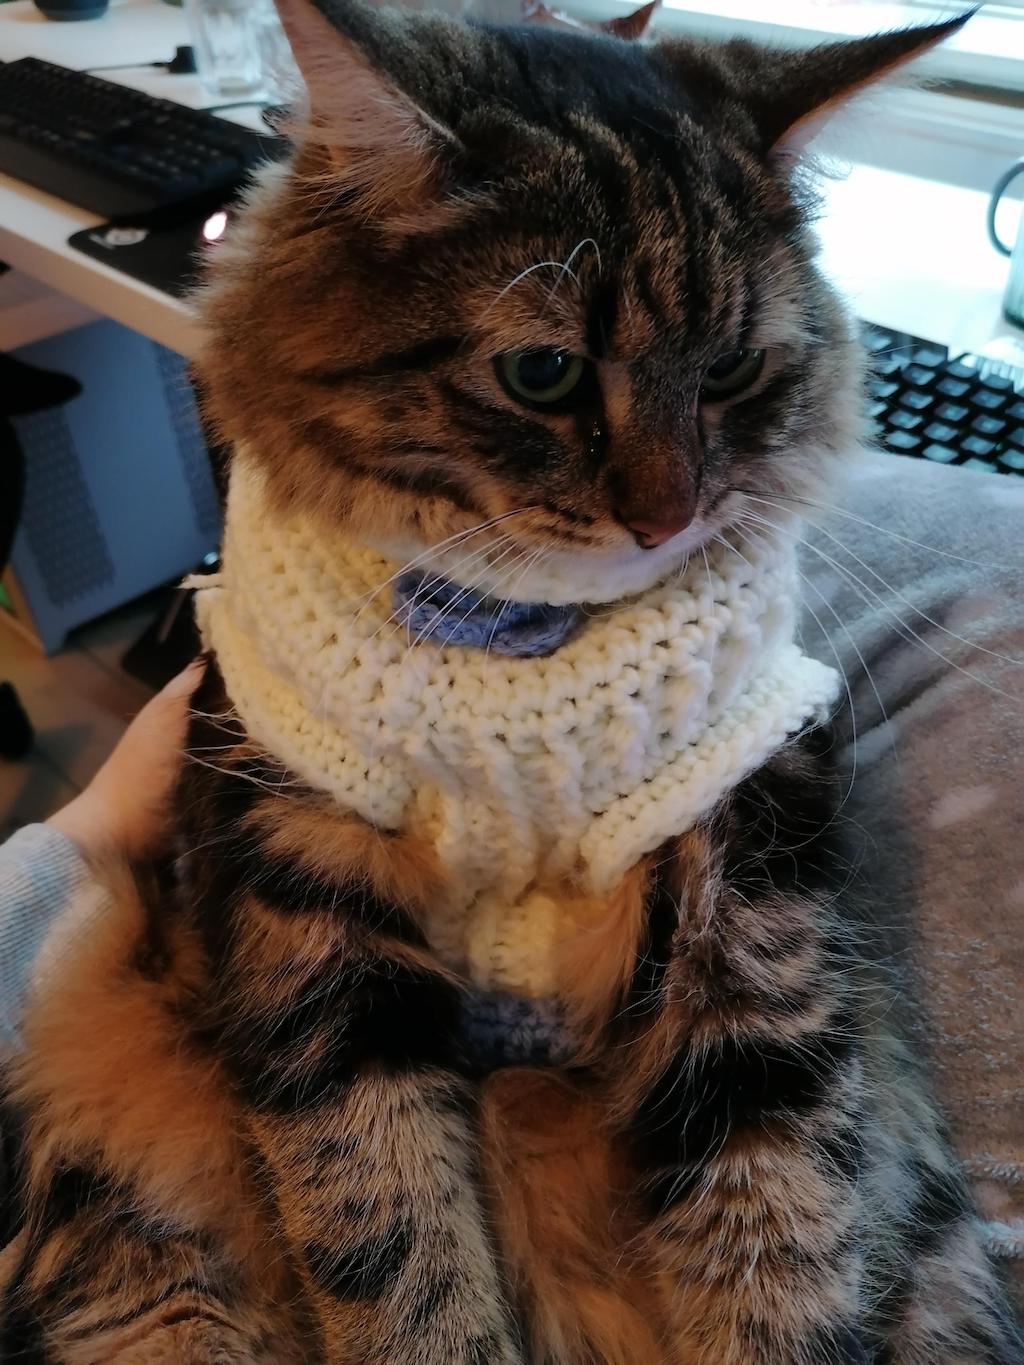 Voxel In Sweater Sitting Up